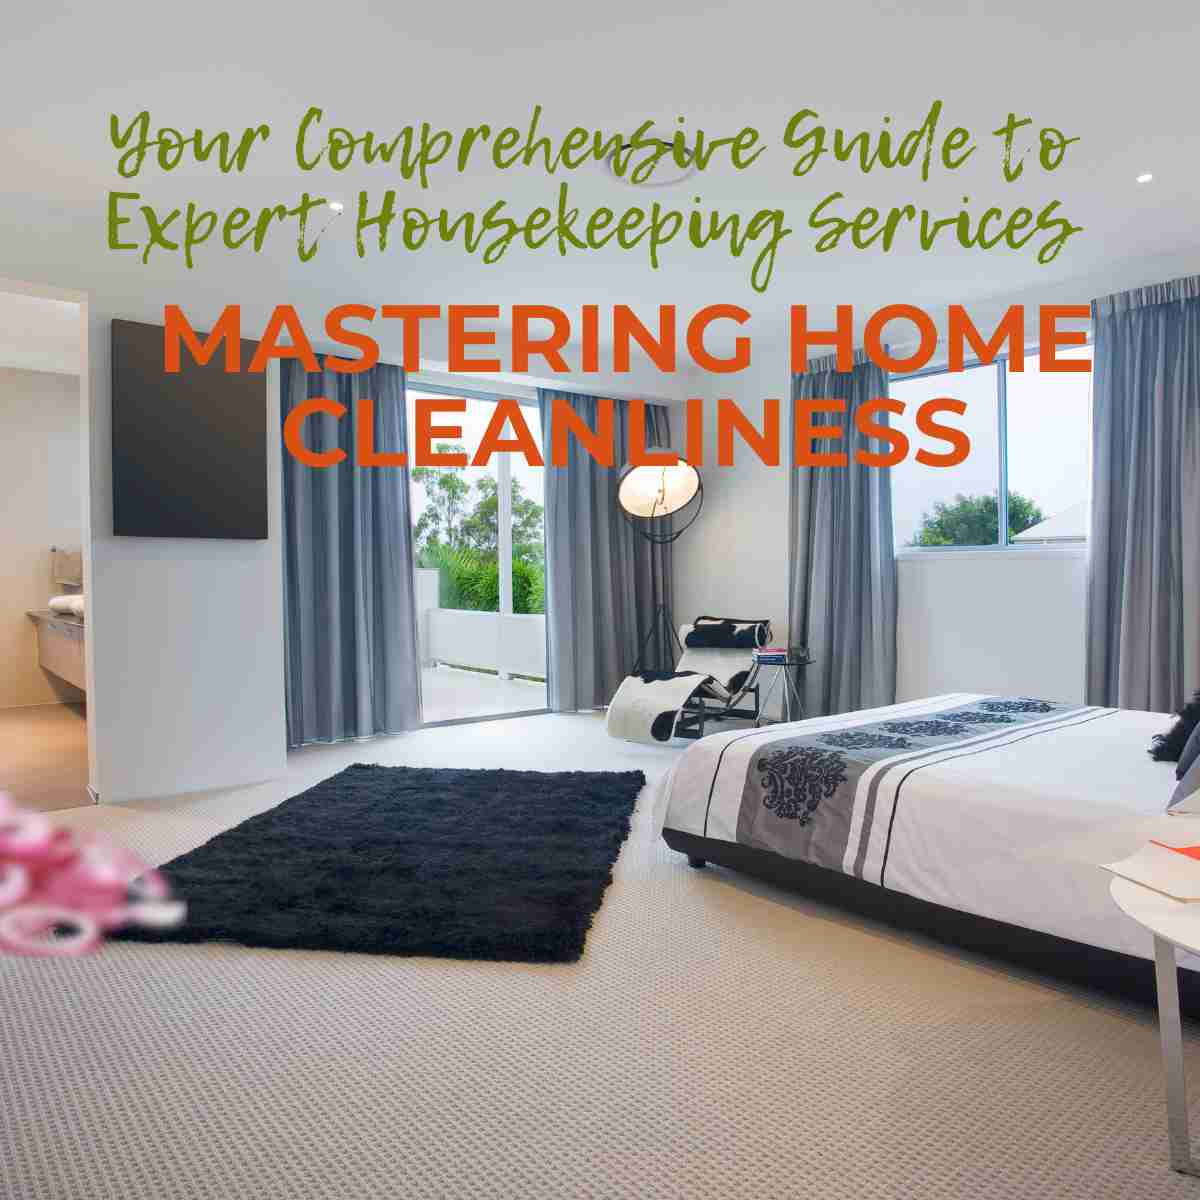 Mastering Home Cleanliness